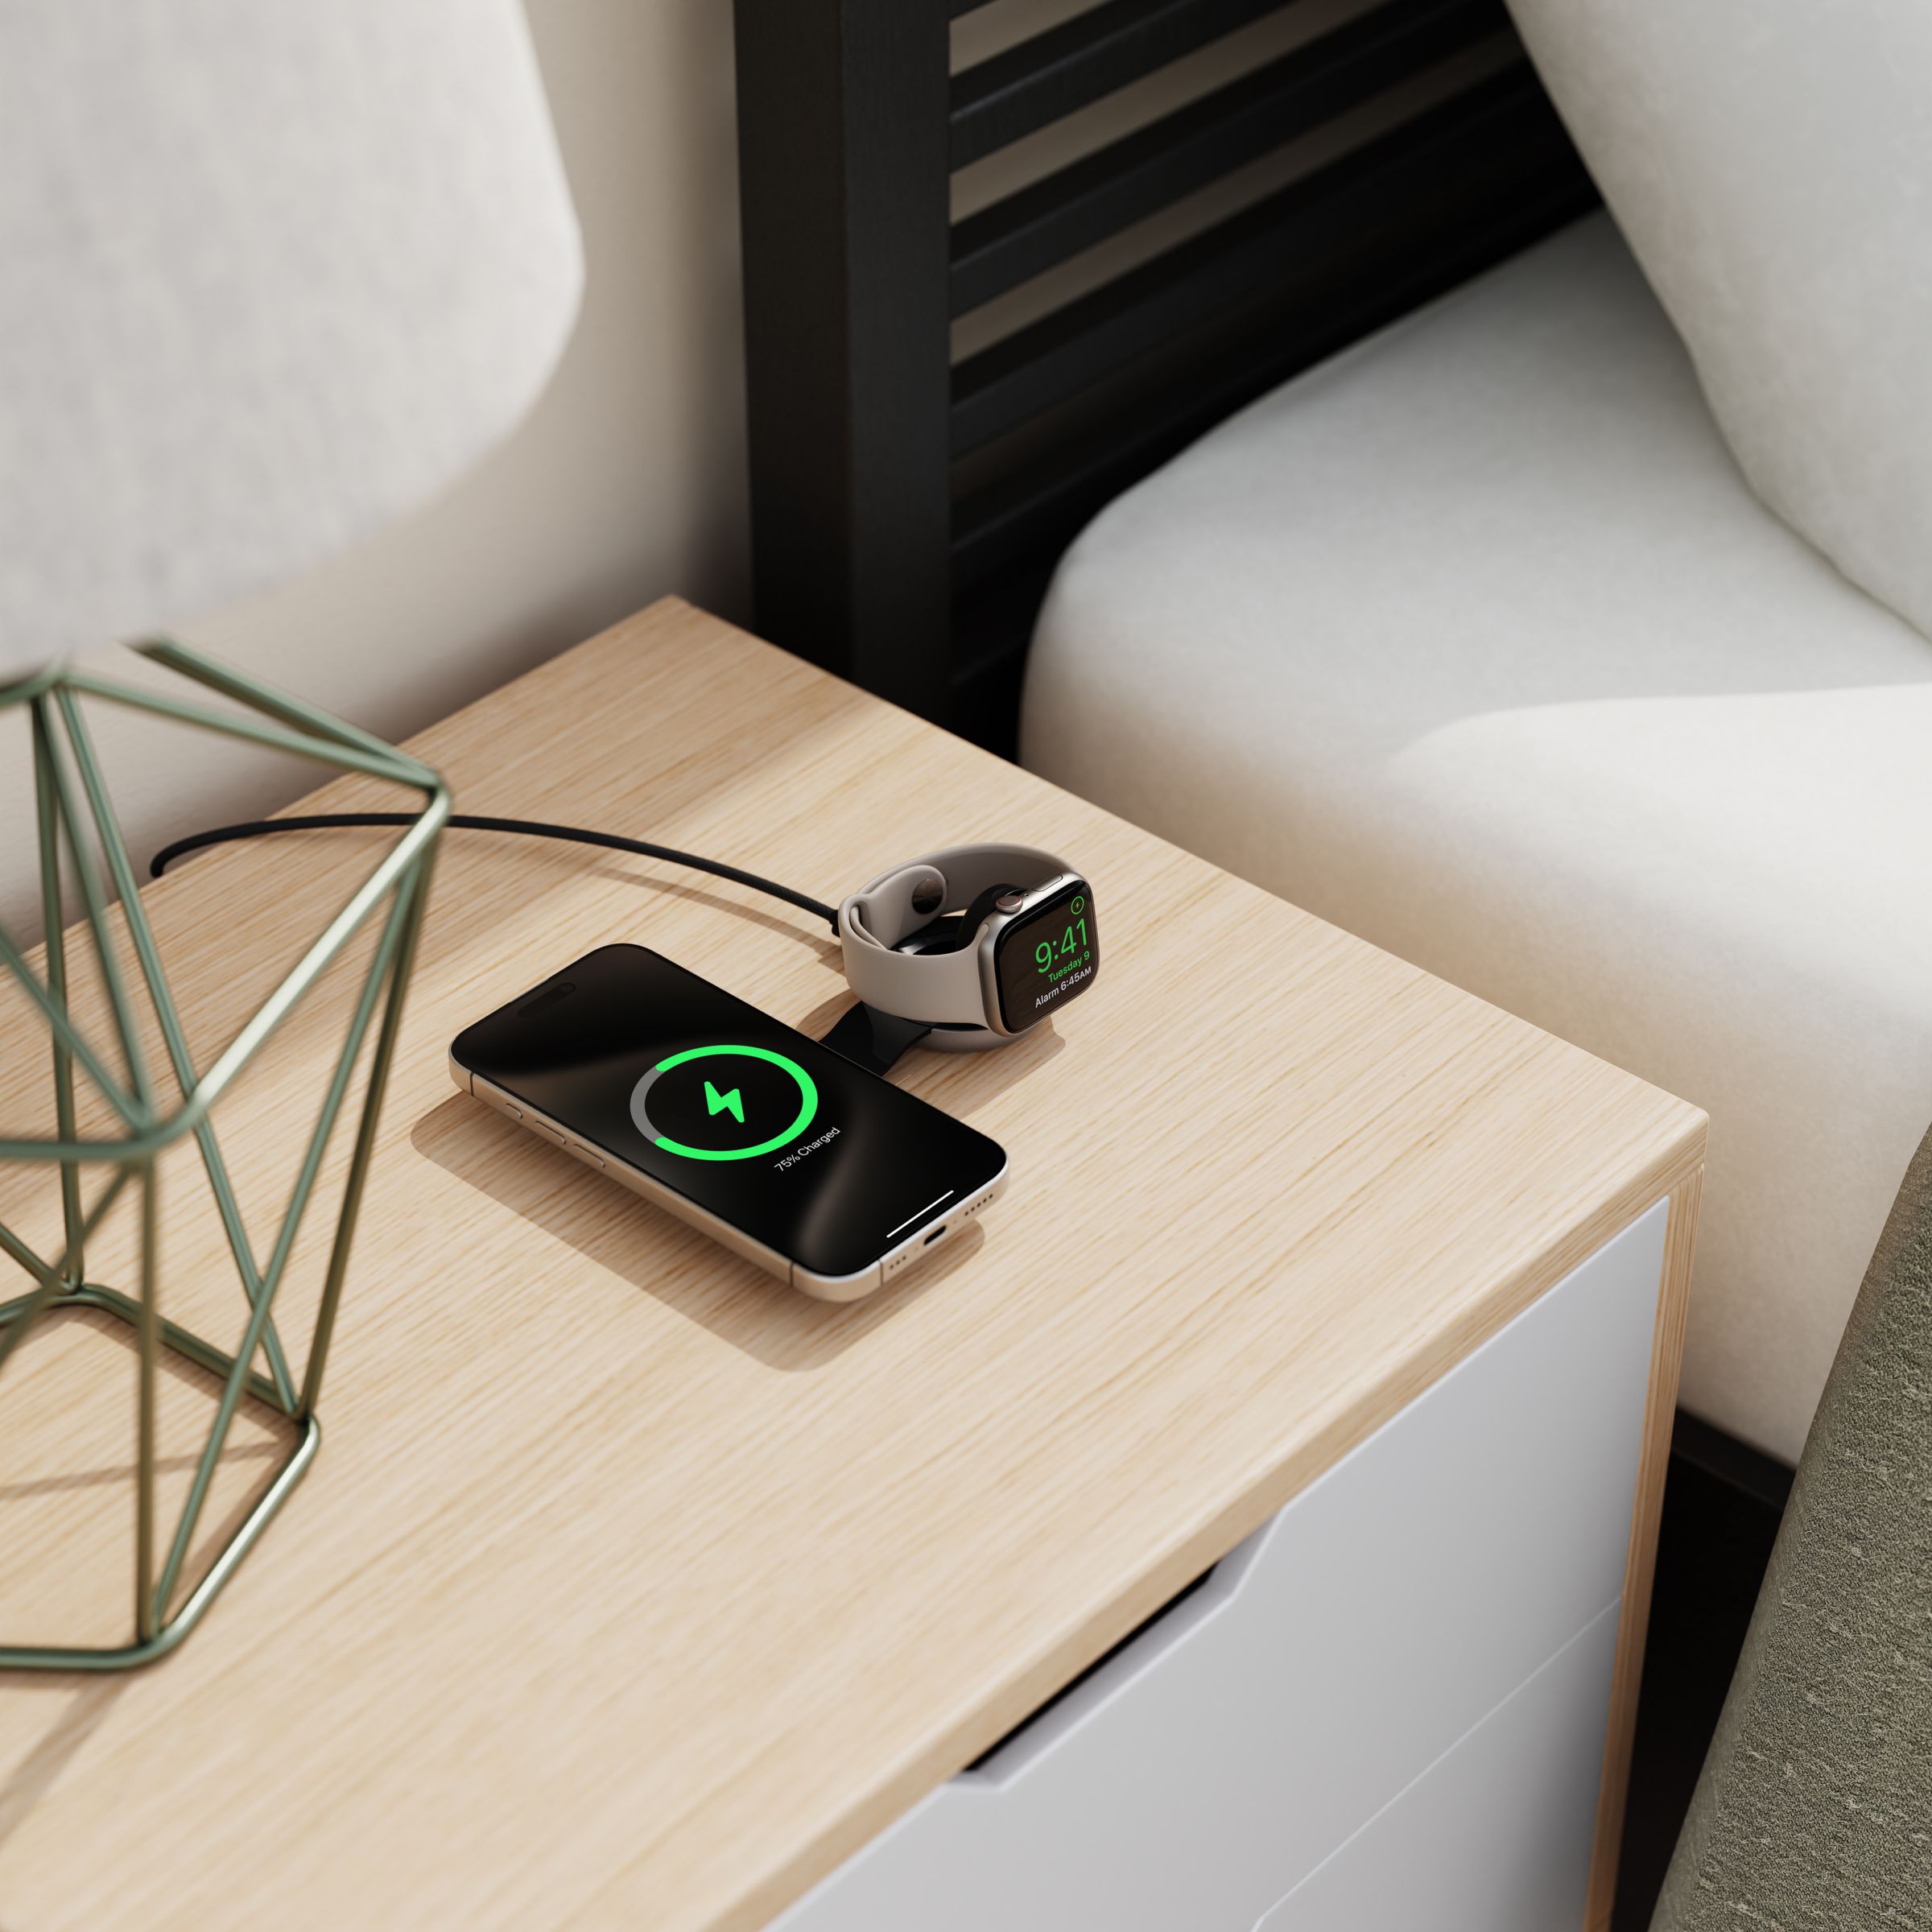 The Twelve South Butterfly MagSafe charger, charging an iPhone and an Apple Watch on a bedside table.